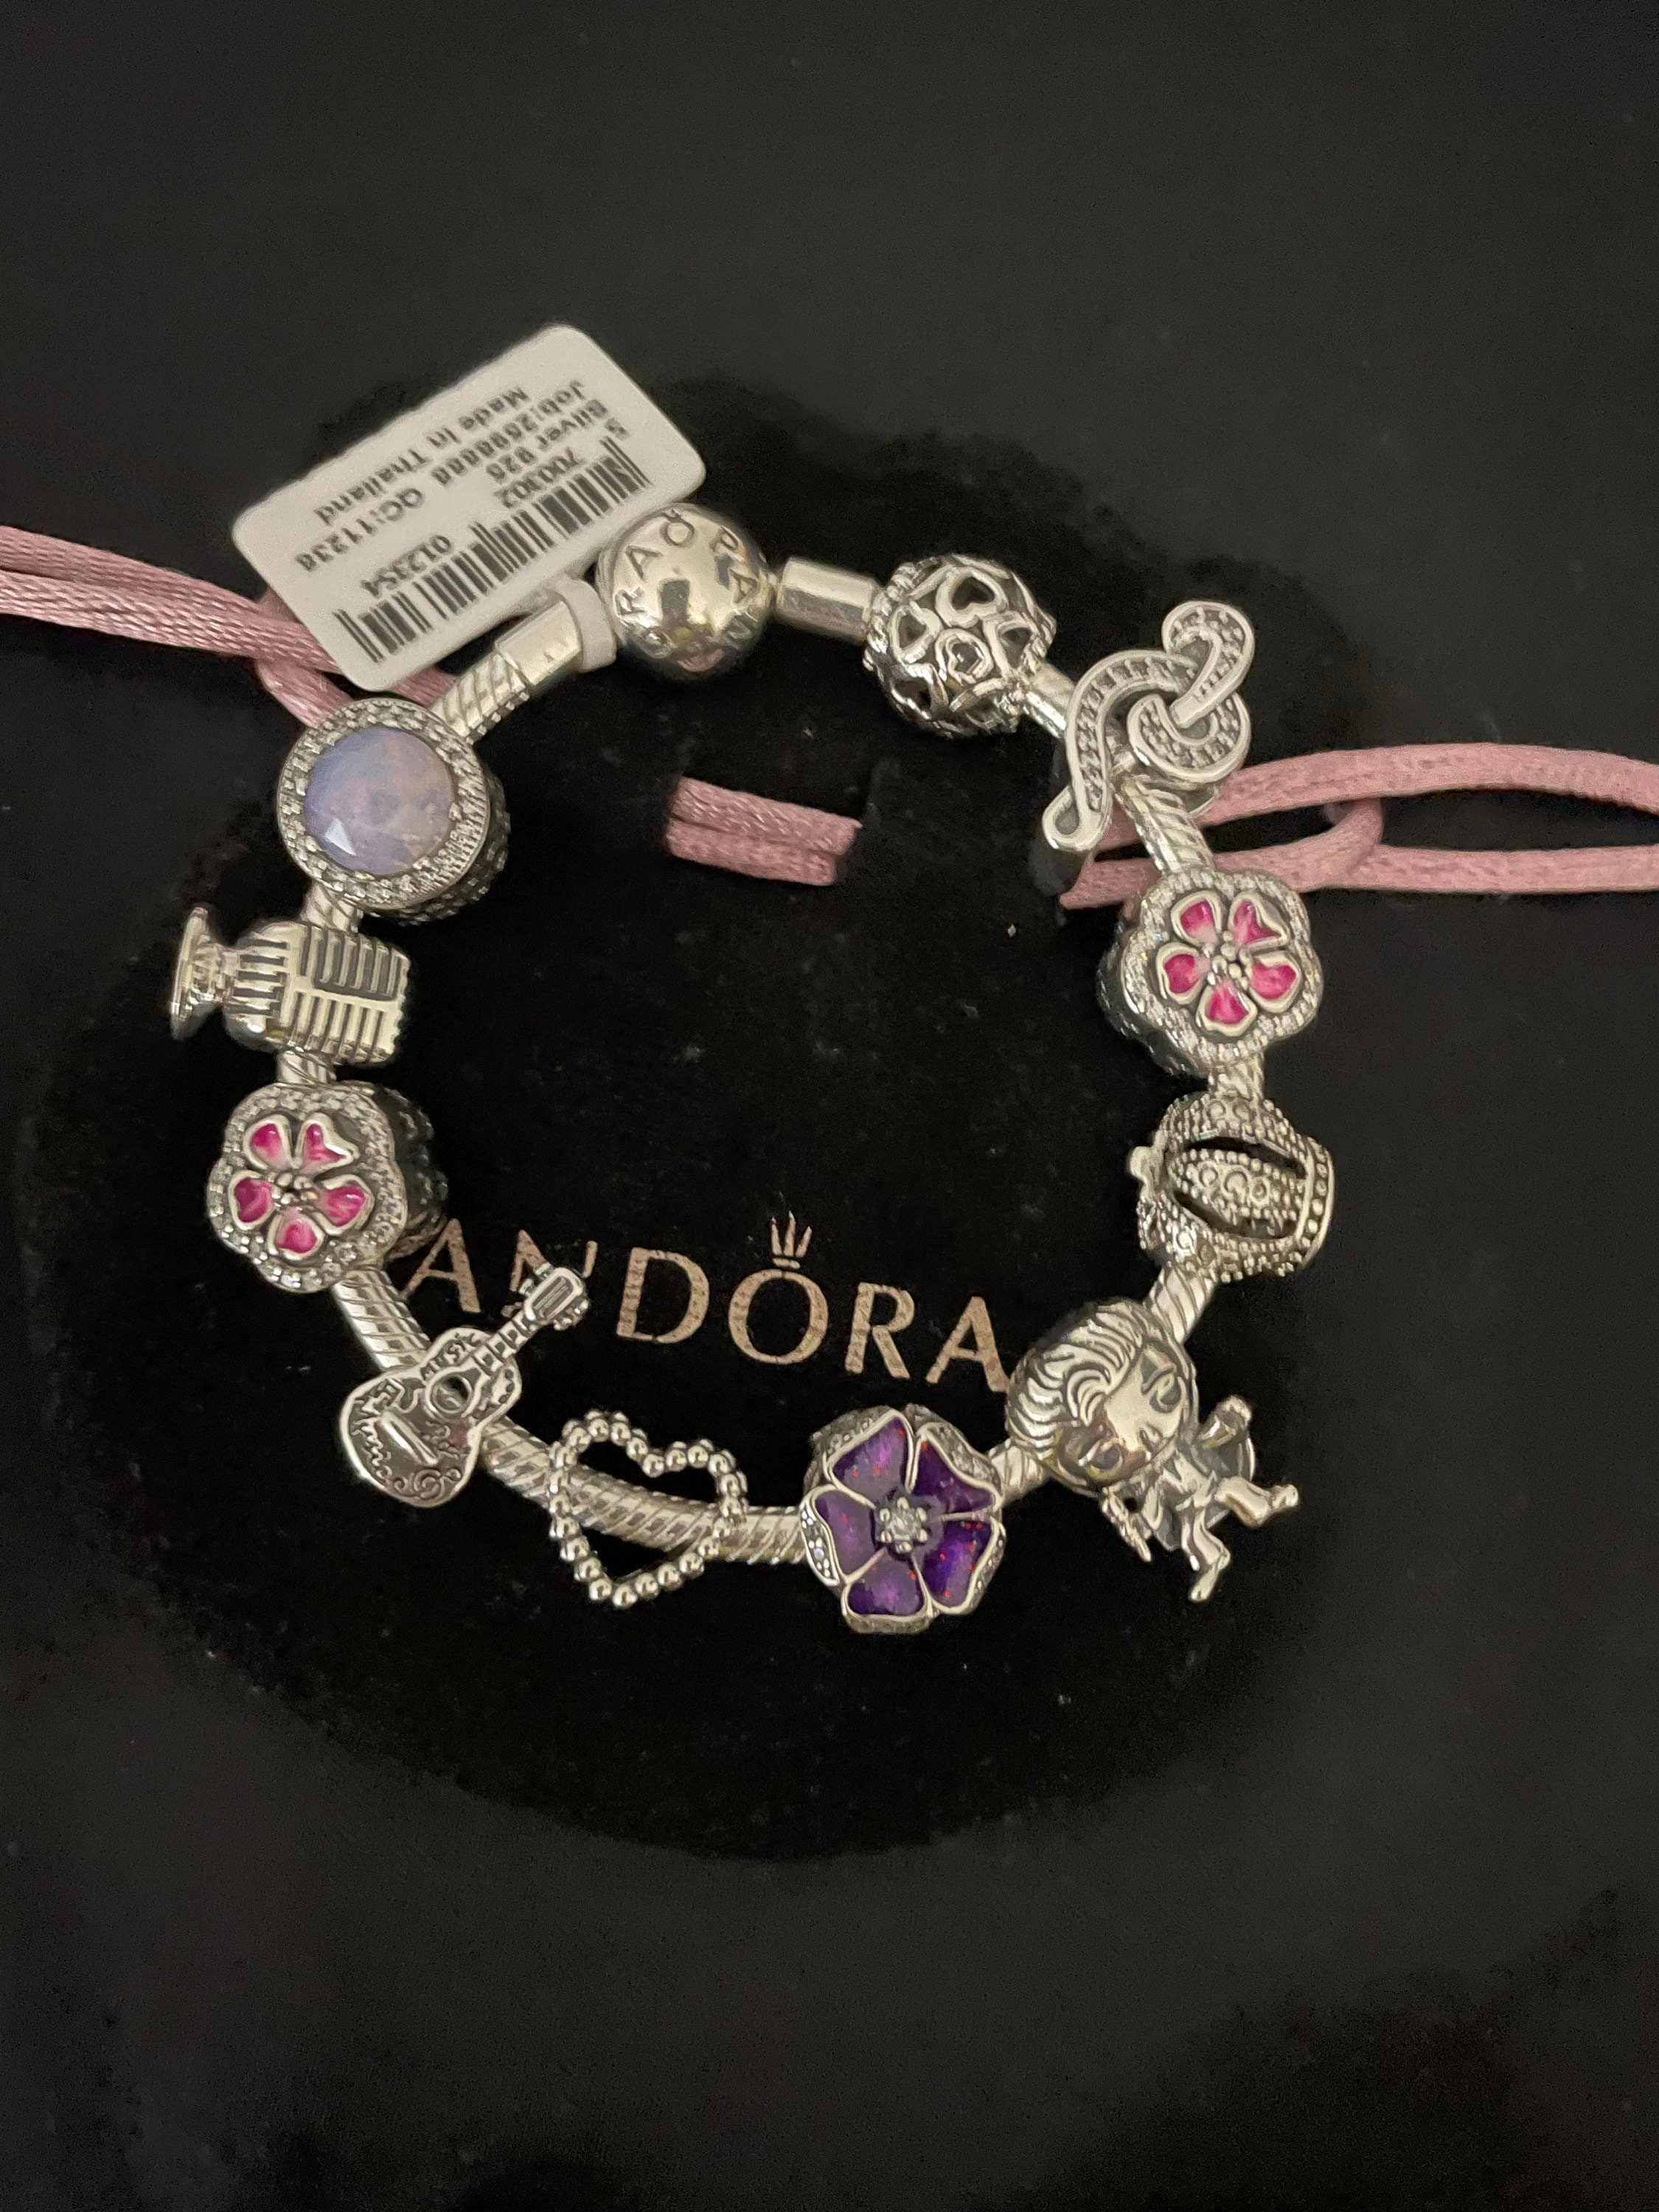 Pandora Bracelet With Pink Themed Charms -  Sweden